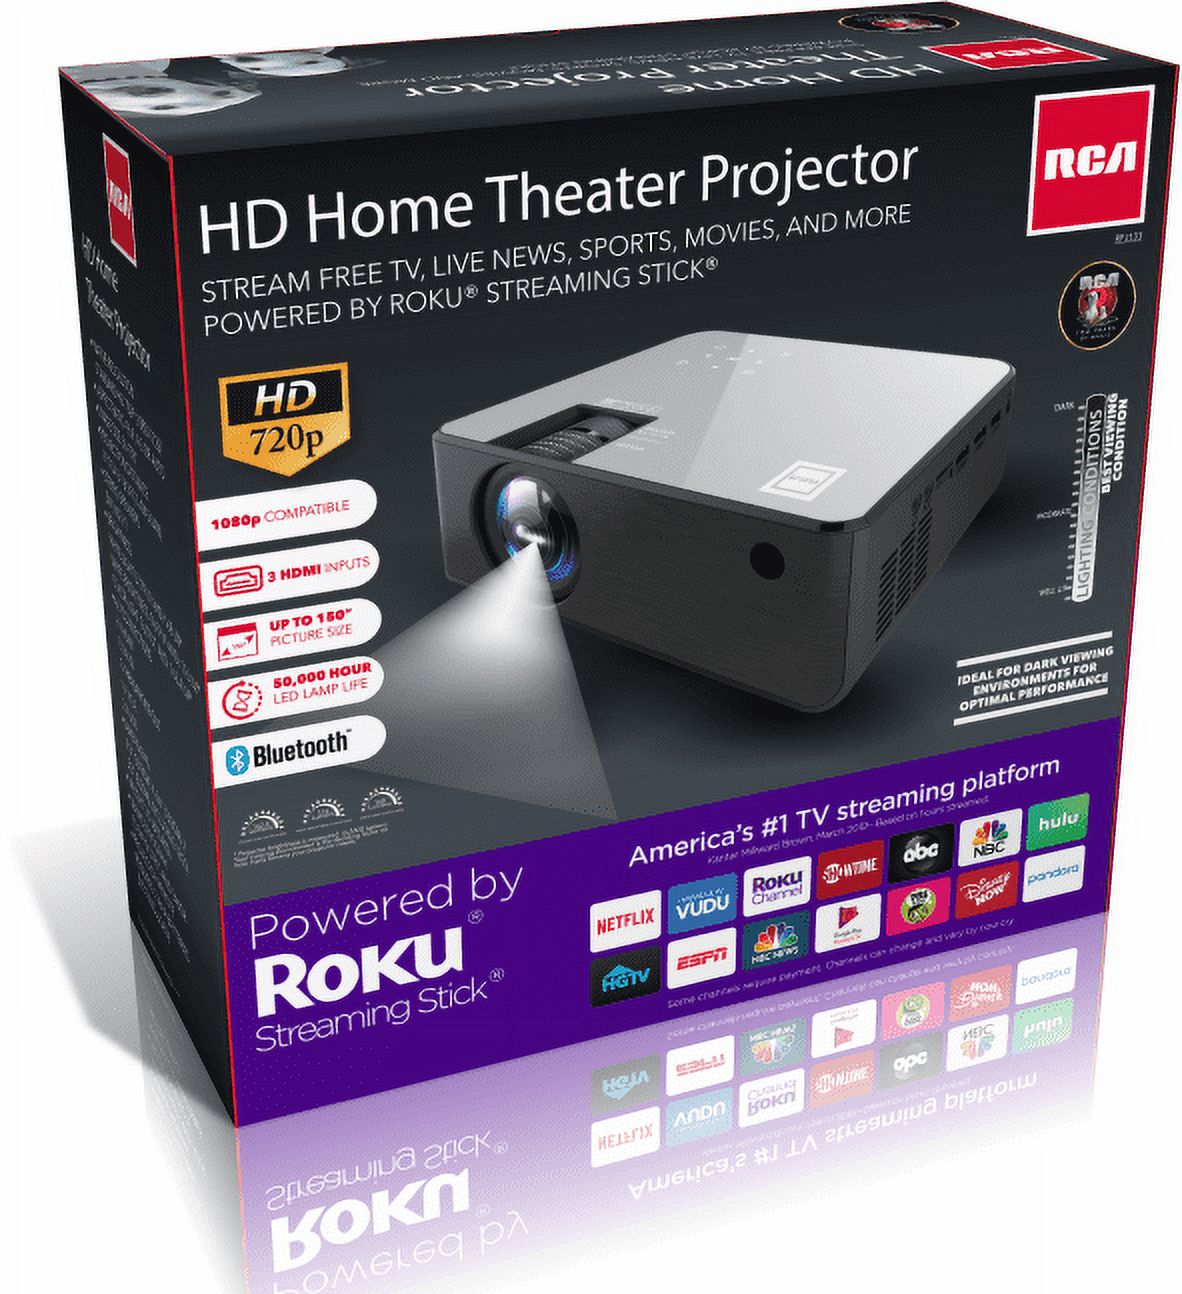 RCA 720p Smart Wi-Fi Home Theater Projector w/ Roku Stick - image 8 of 10